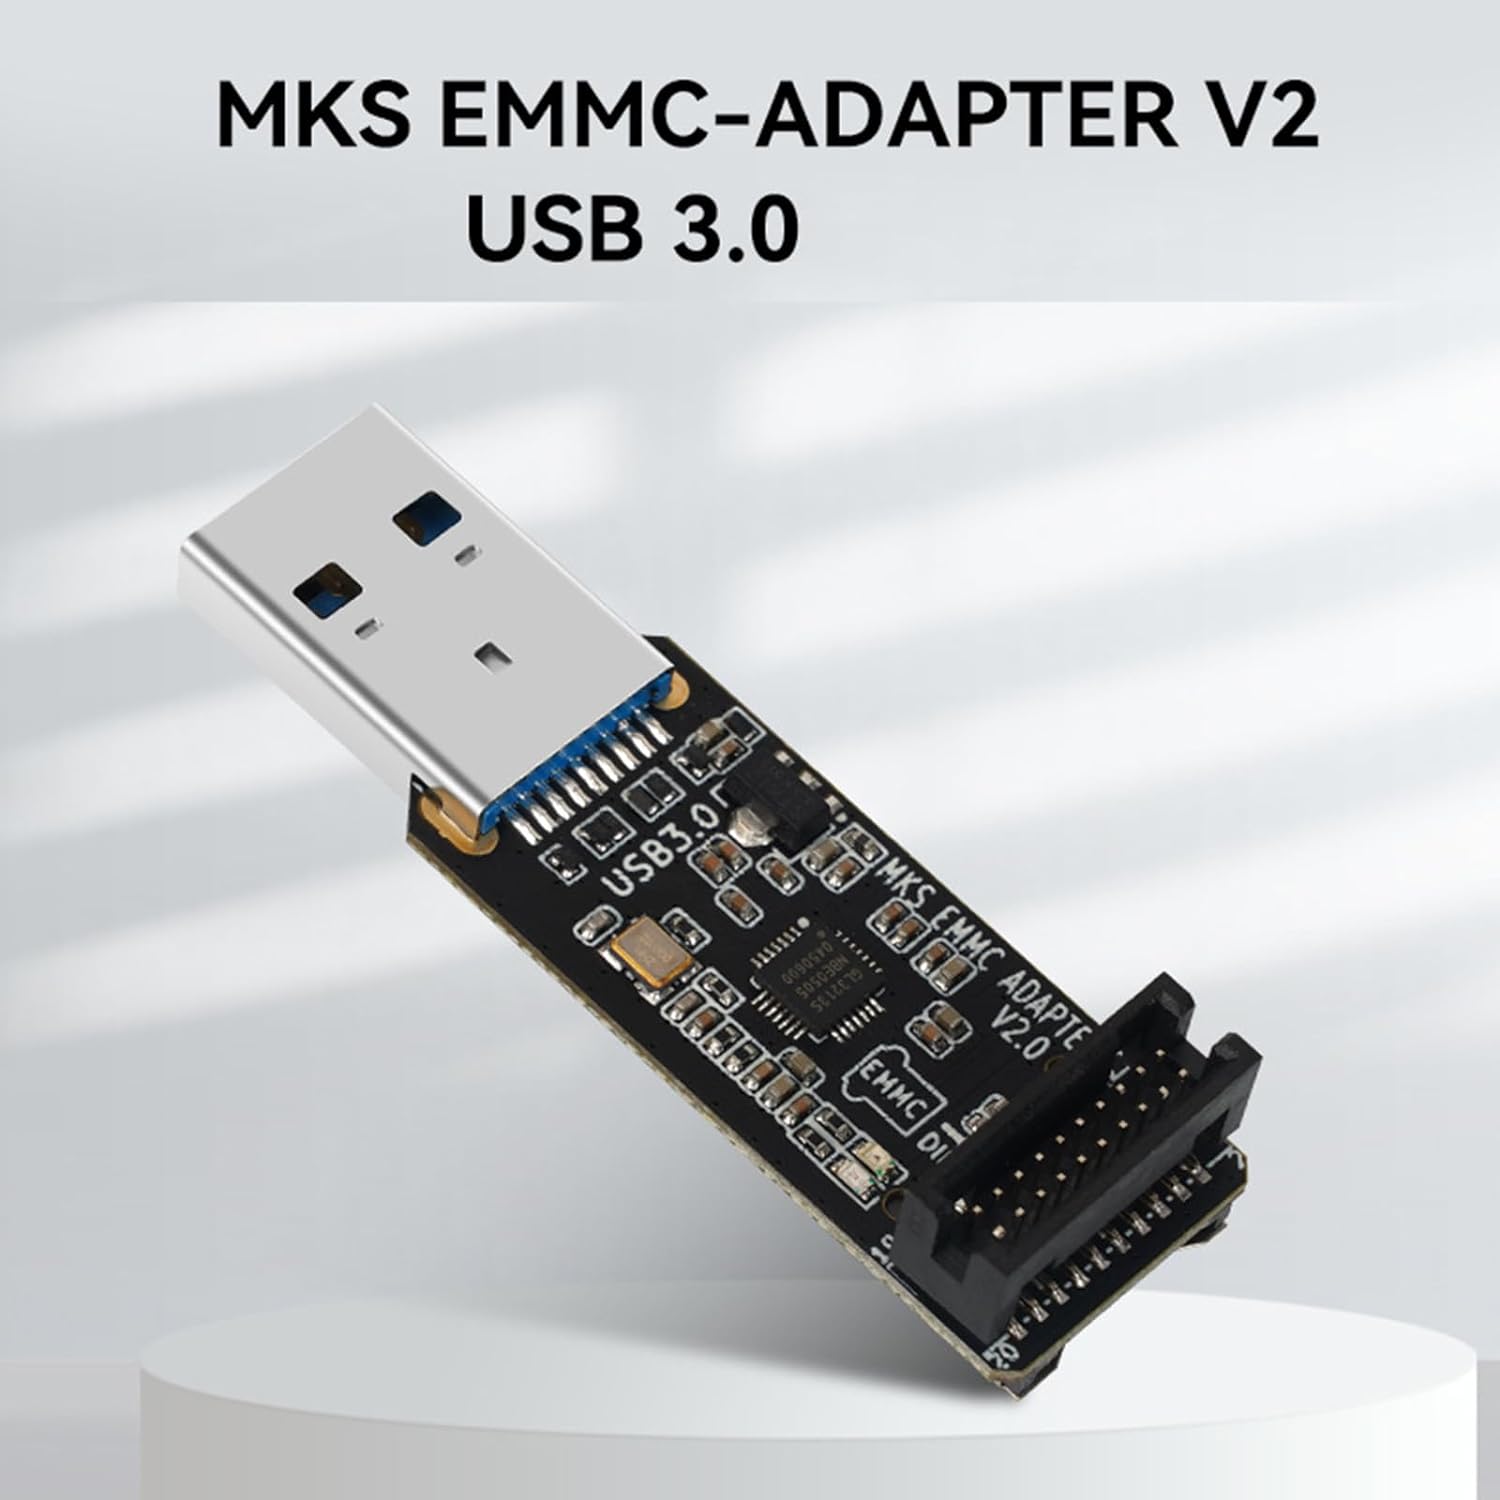 lanema-emmc-adapter-v2-usb30-card-reader-for-emmc-module-and-memory-card-high-speed-read-and-write-3d-printing-parts-and-3 lanema EMMC Adapter V2 USB3.0 Card Reader Review